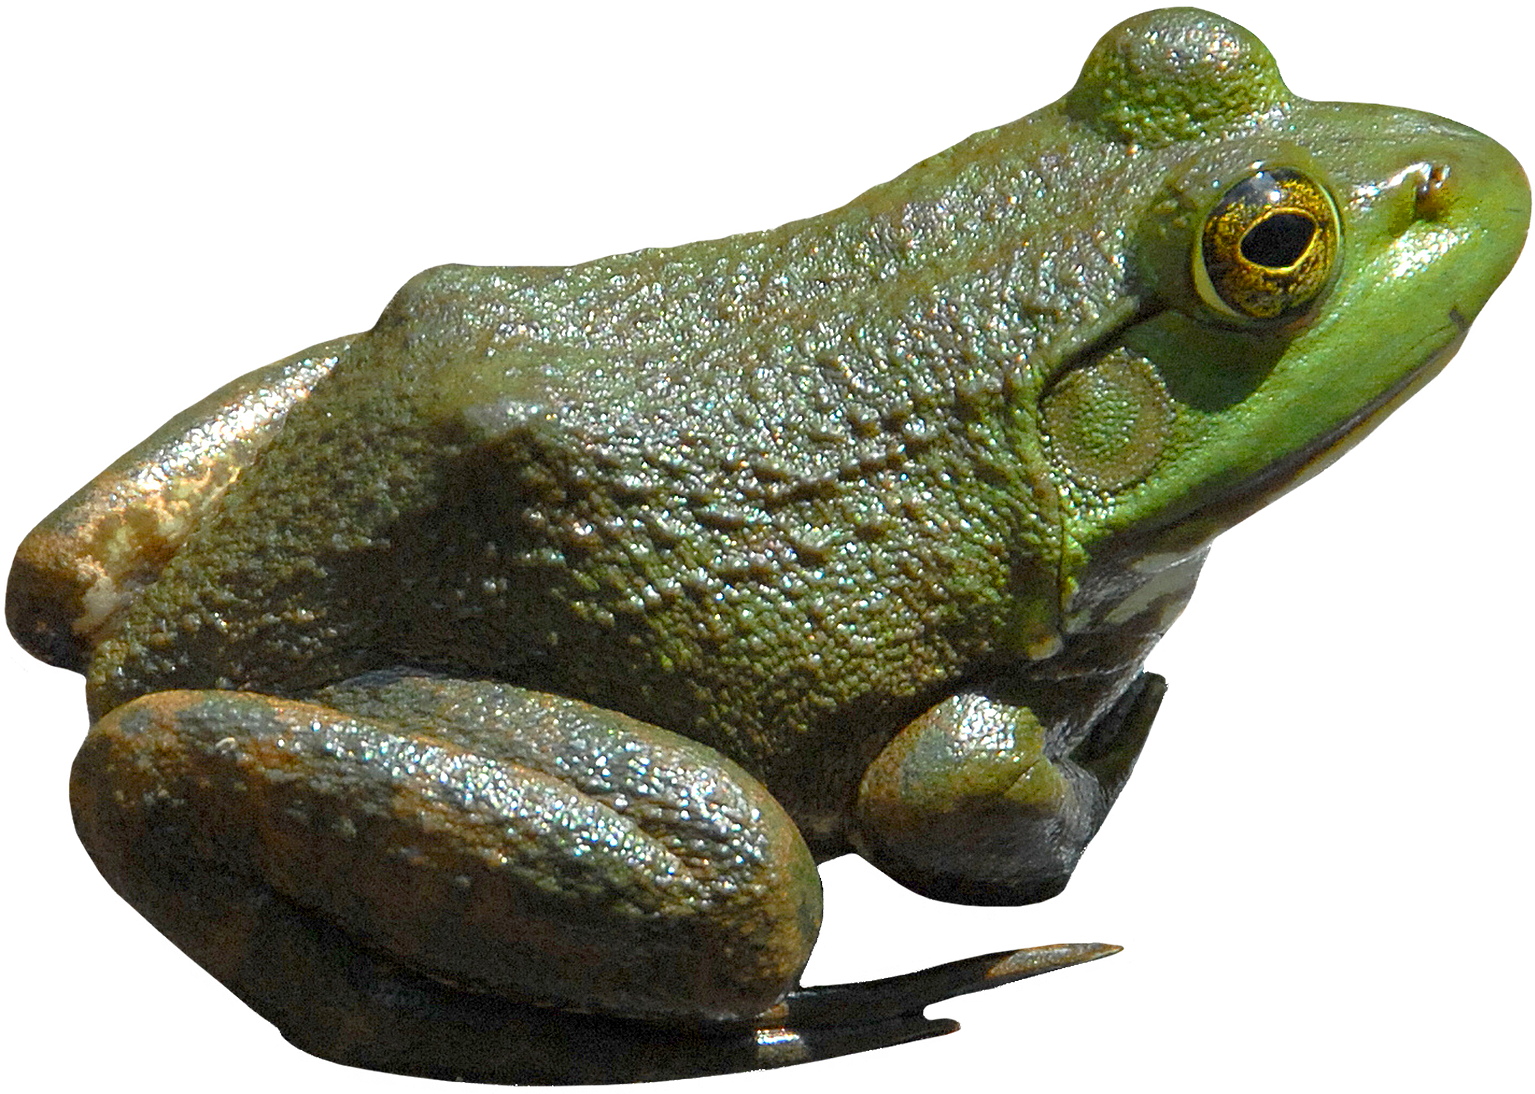 Frog PNG - 20635